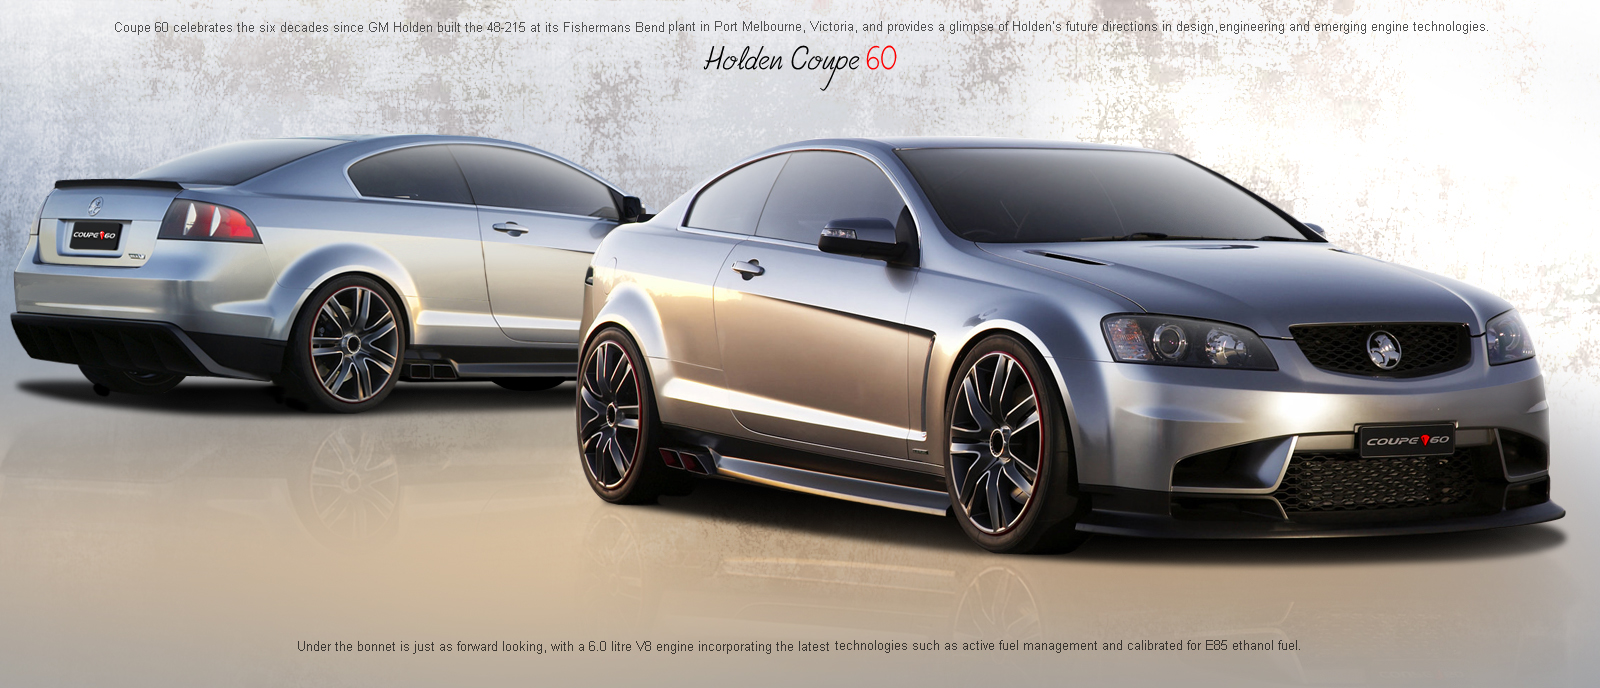 Images of Holden Coupe 60 | 1600x688